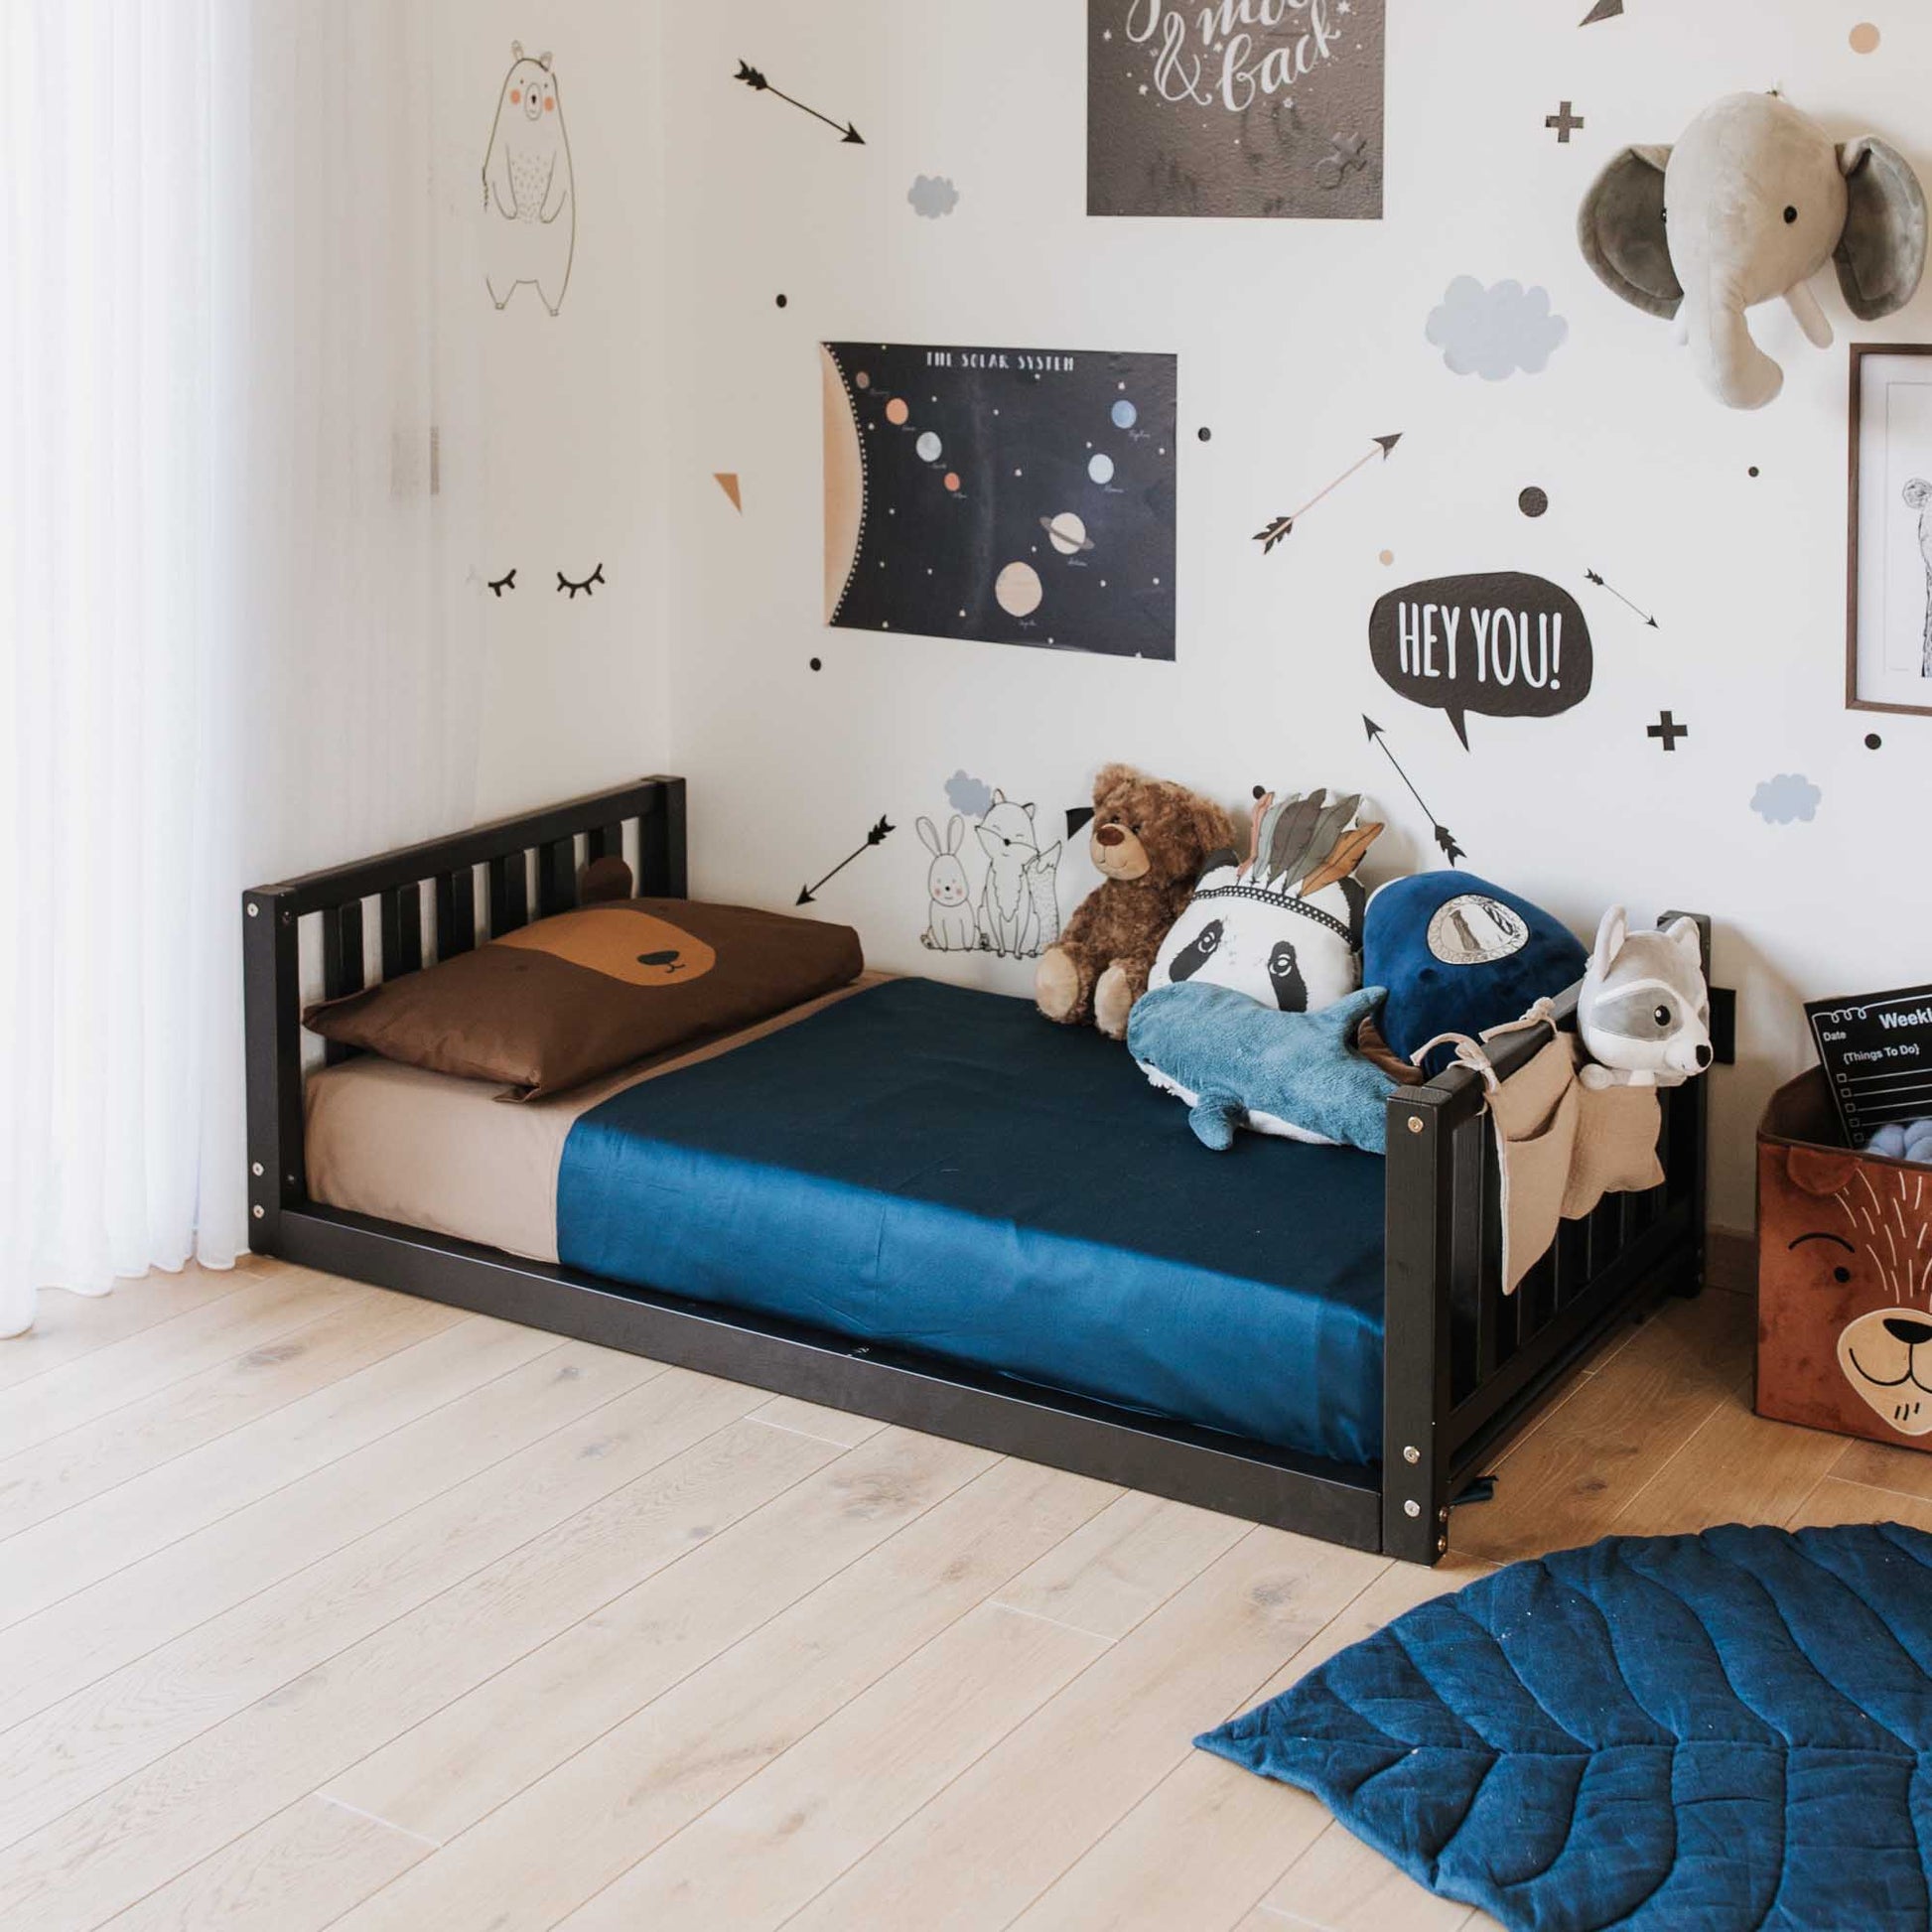 A child's room with a Sweet Home From Wood kids' bed with a headboard and footboard, toys, and wall decals.